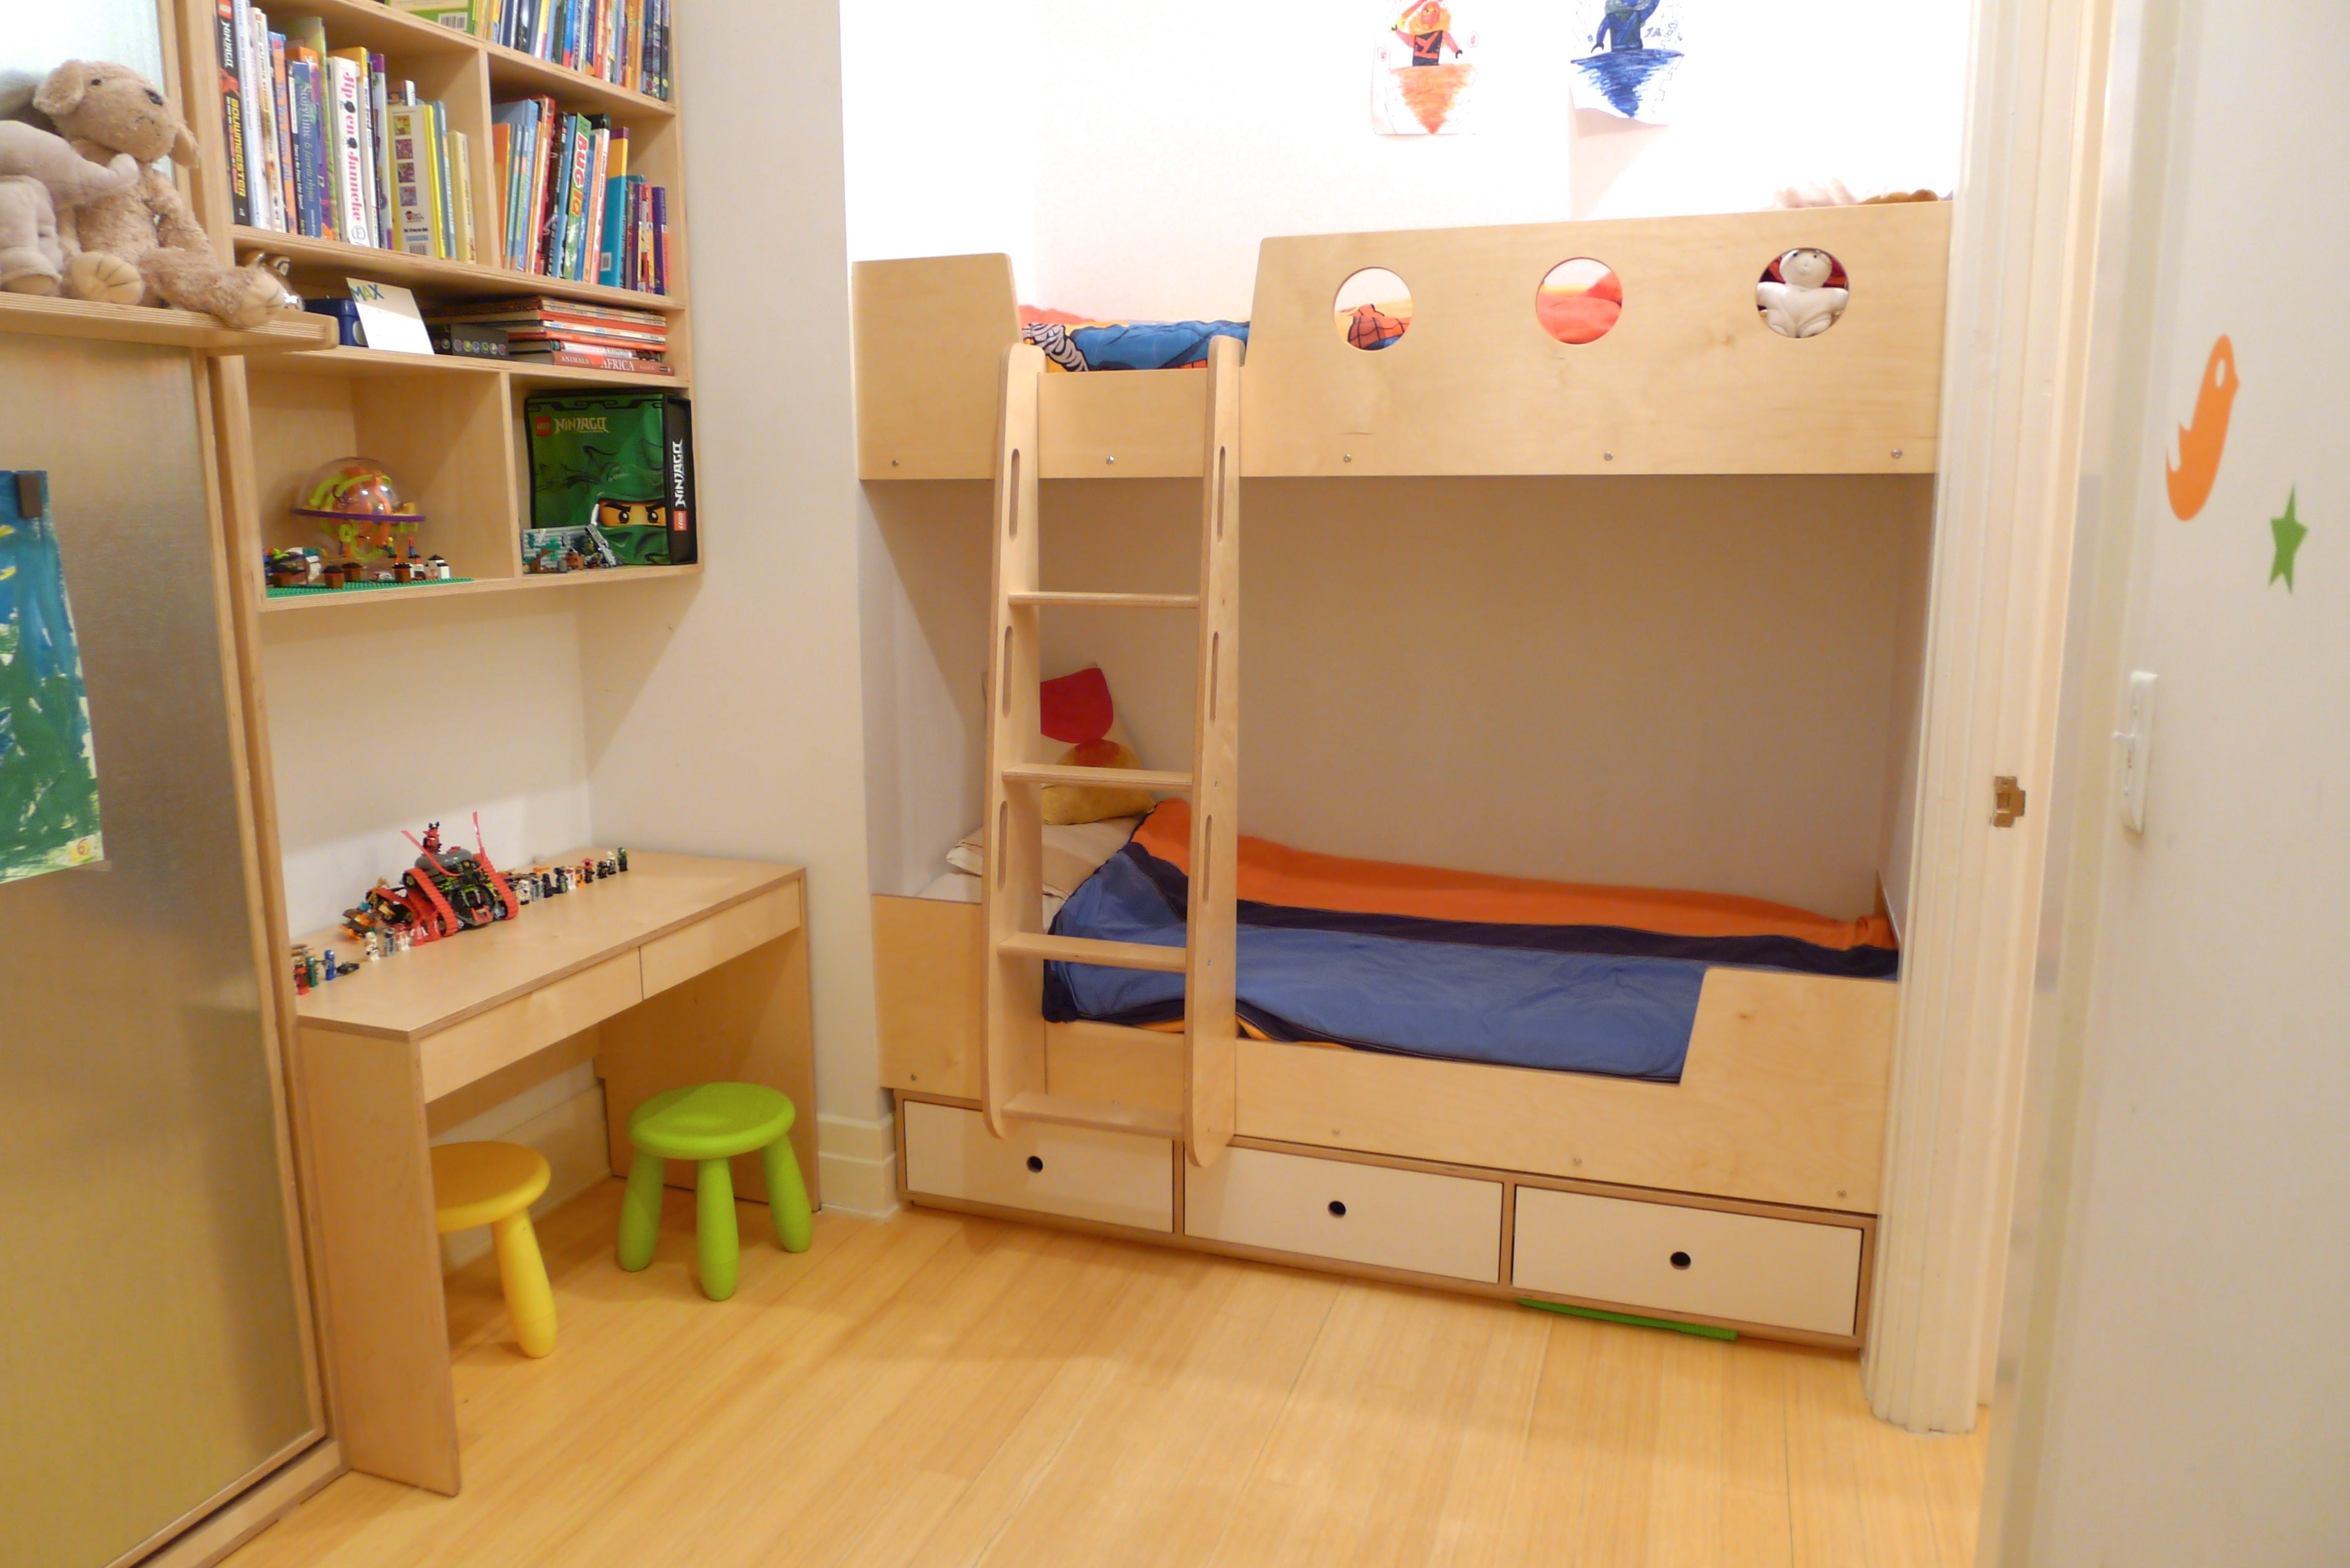 Child's bedroom with bunk beds, a small desk with stools, and a bookshelf filled with toys and books.